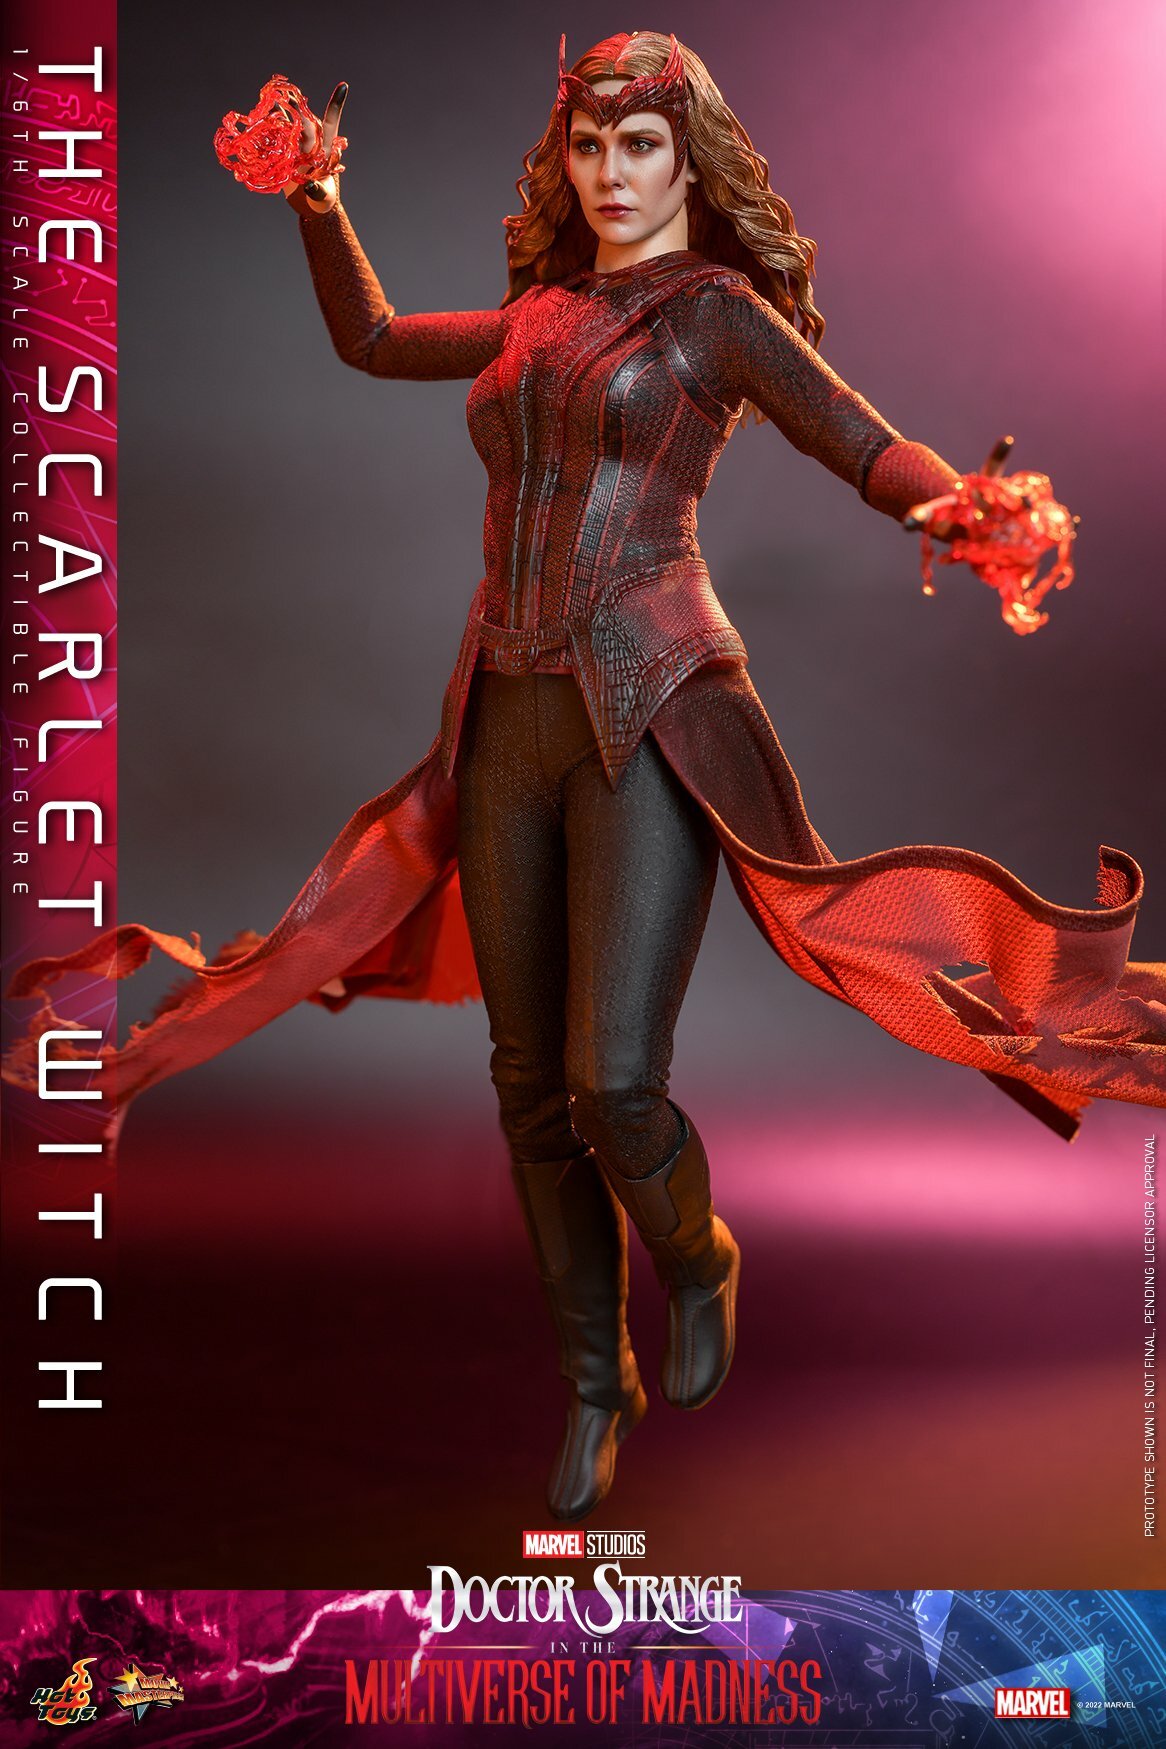 Hot-Toy-Multiverse-of-Madness-Scarlet-Witch-006.jpg.5a547f2a20607e4c18662a933fe25a34.jpg